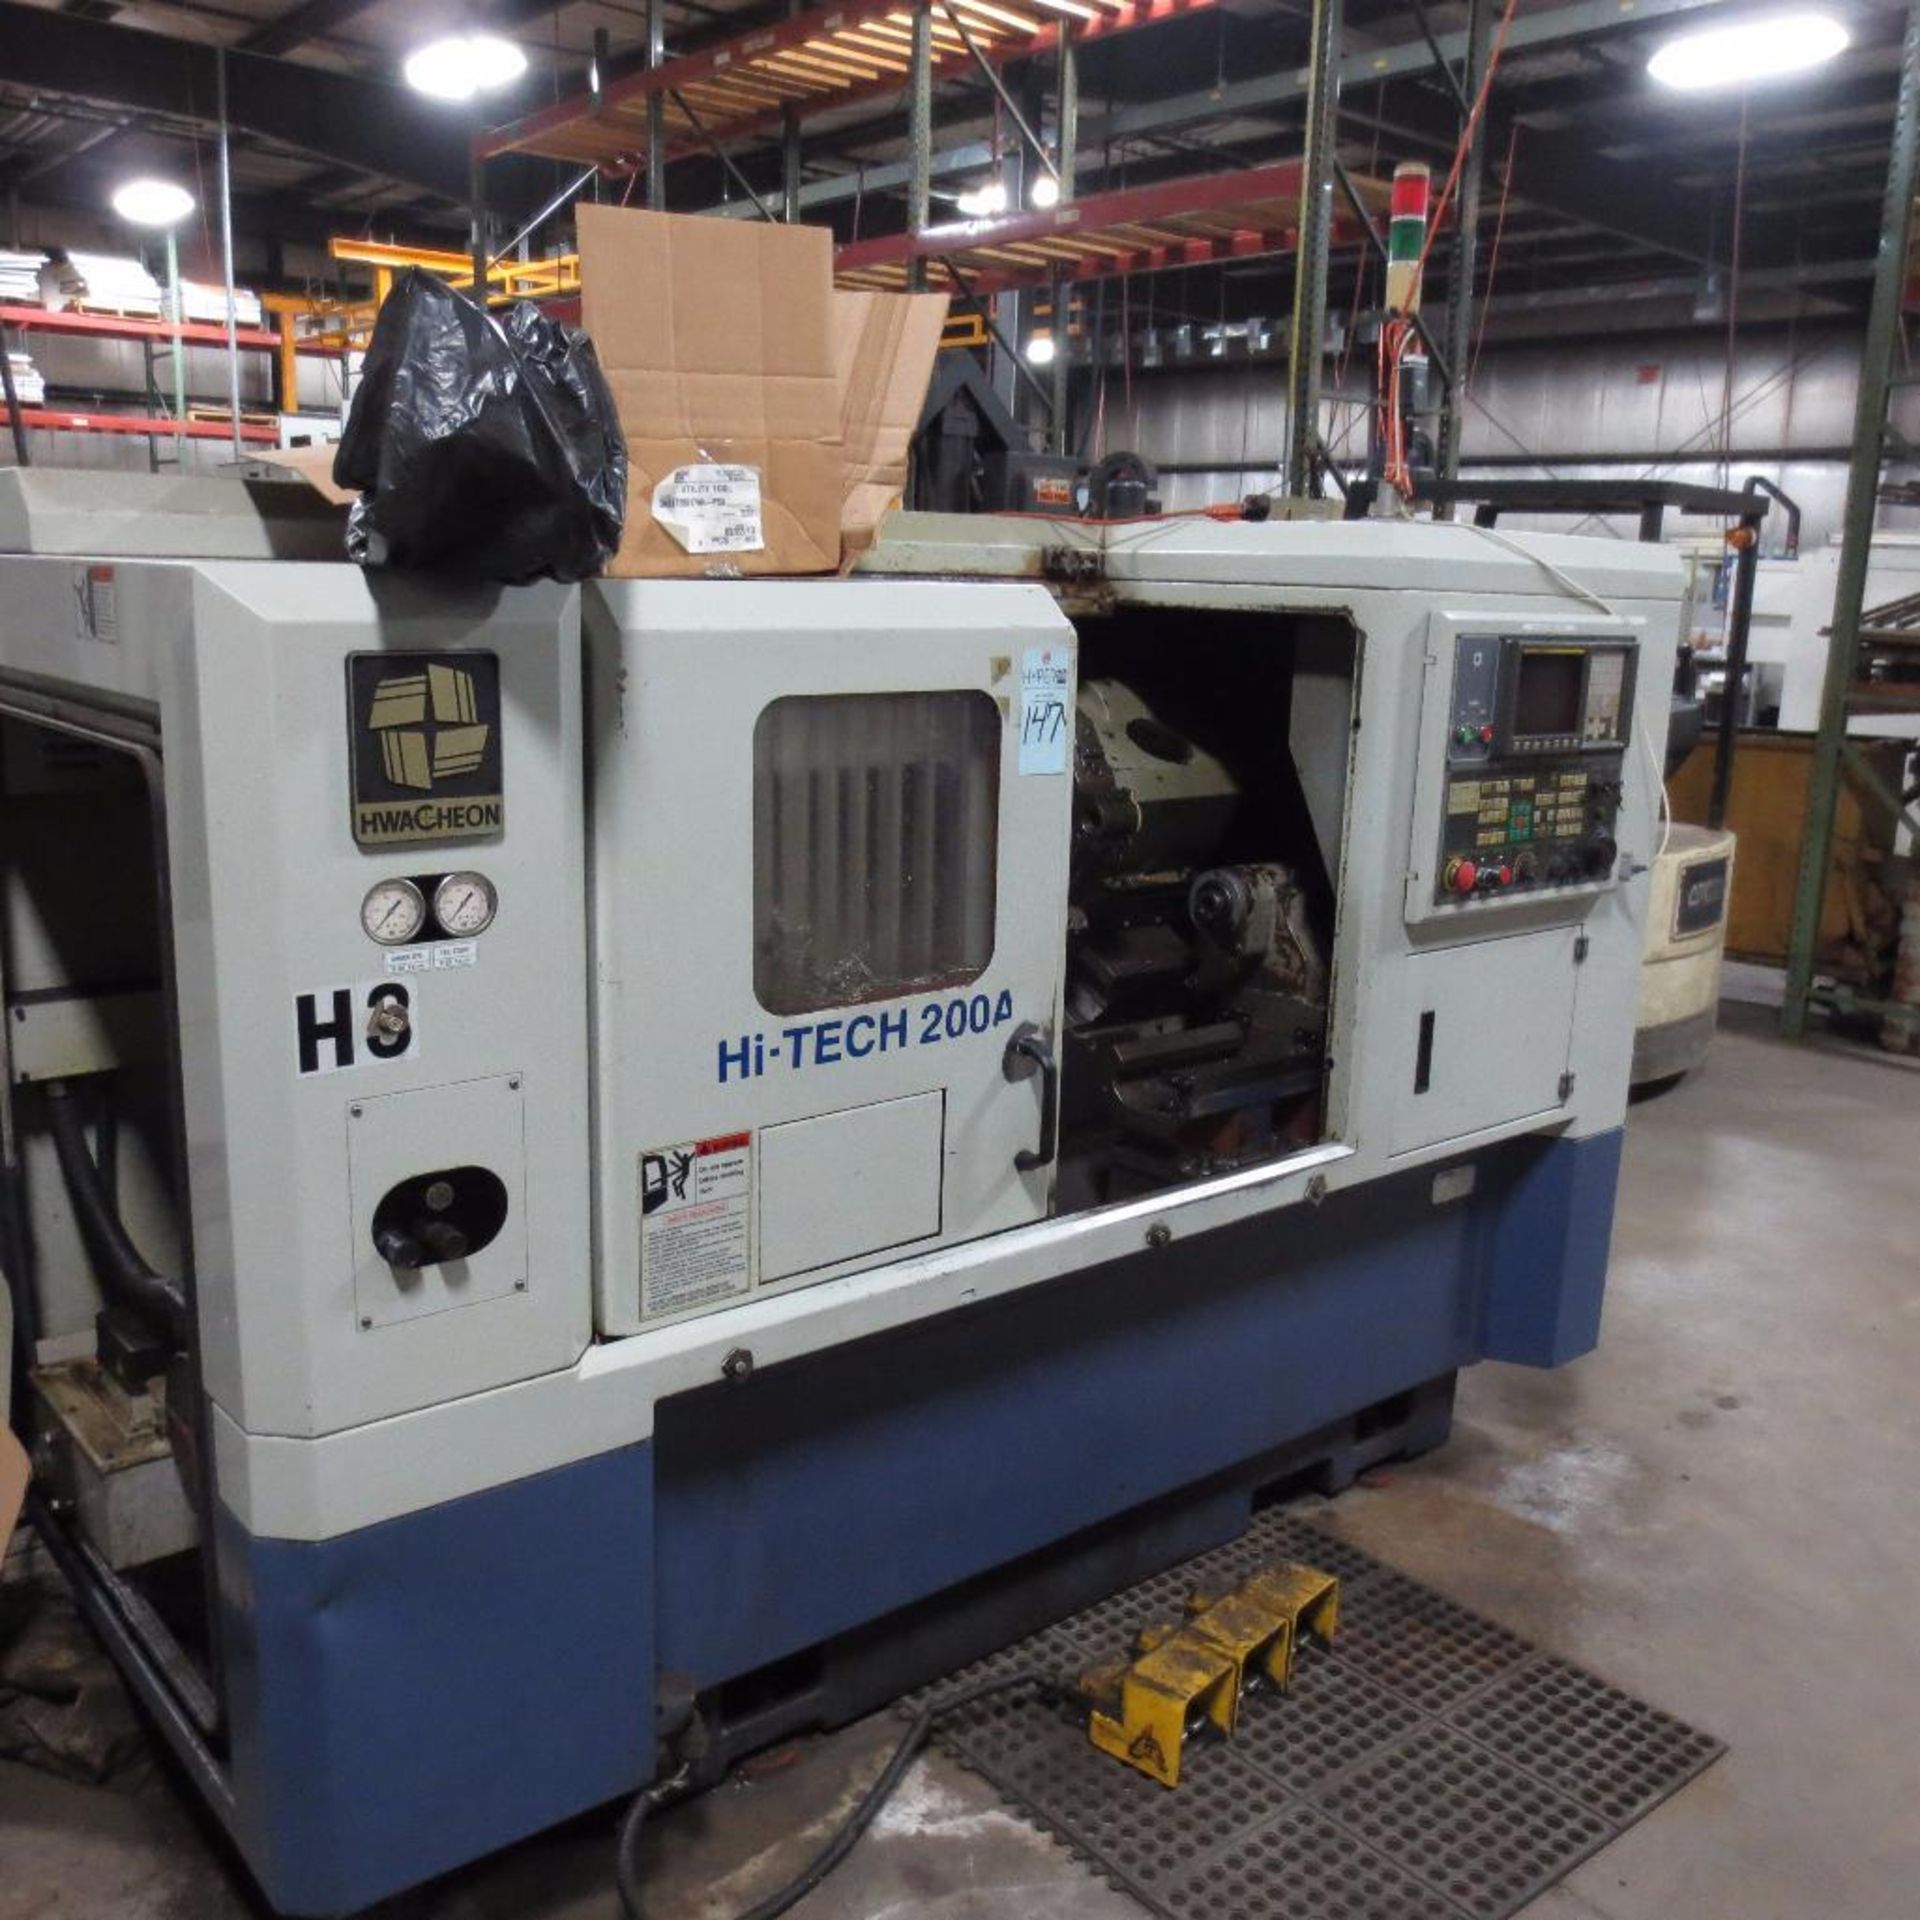 Hwacheon Model HI-Tech 200A I CNC Turning Center, Year 2003, S/N M013351DIF-J, 12-Position Turret,